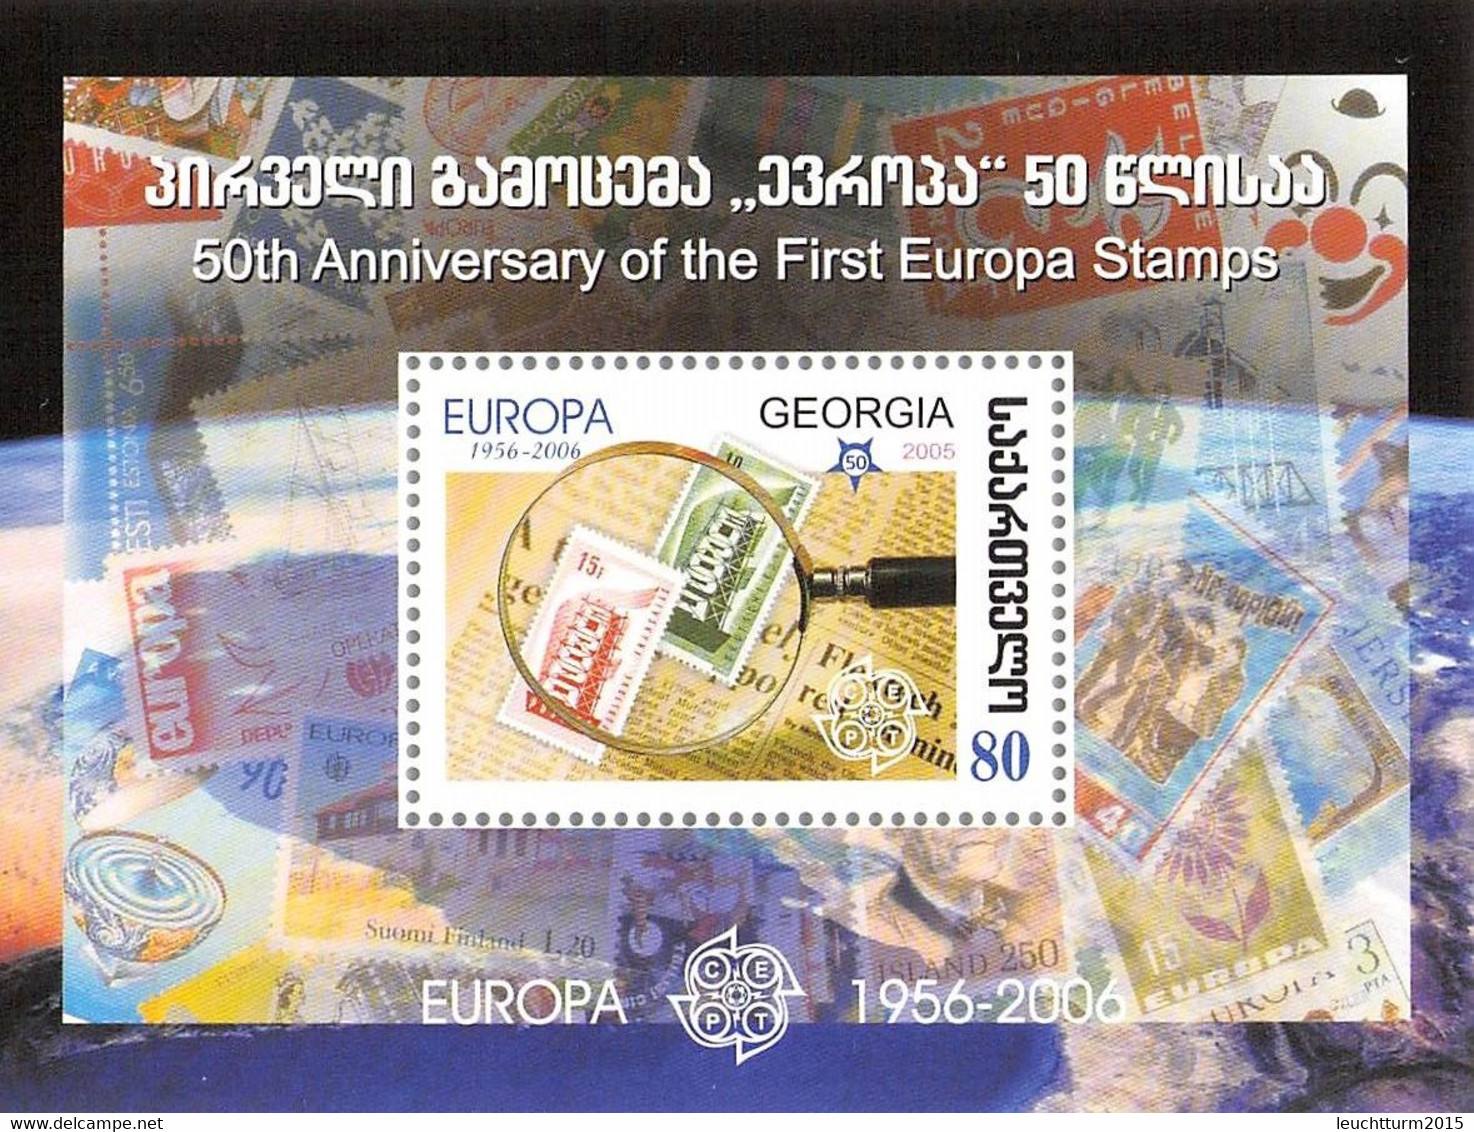 EUROPA - SMALL COLLECTION STAMPS, MINISHEETS MNH /QF130